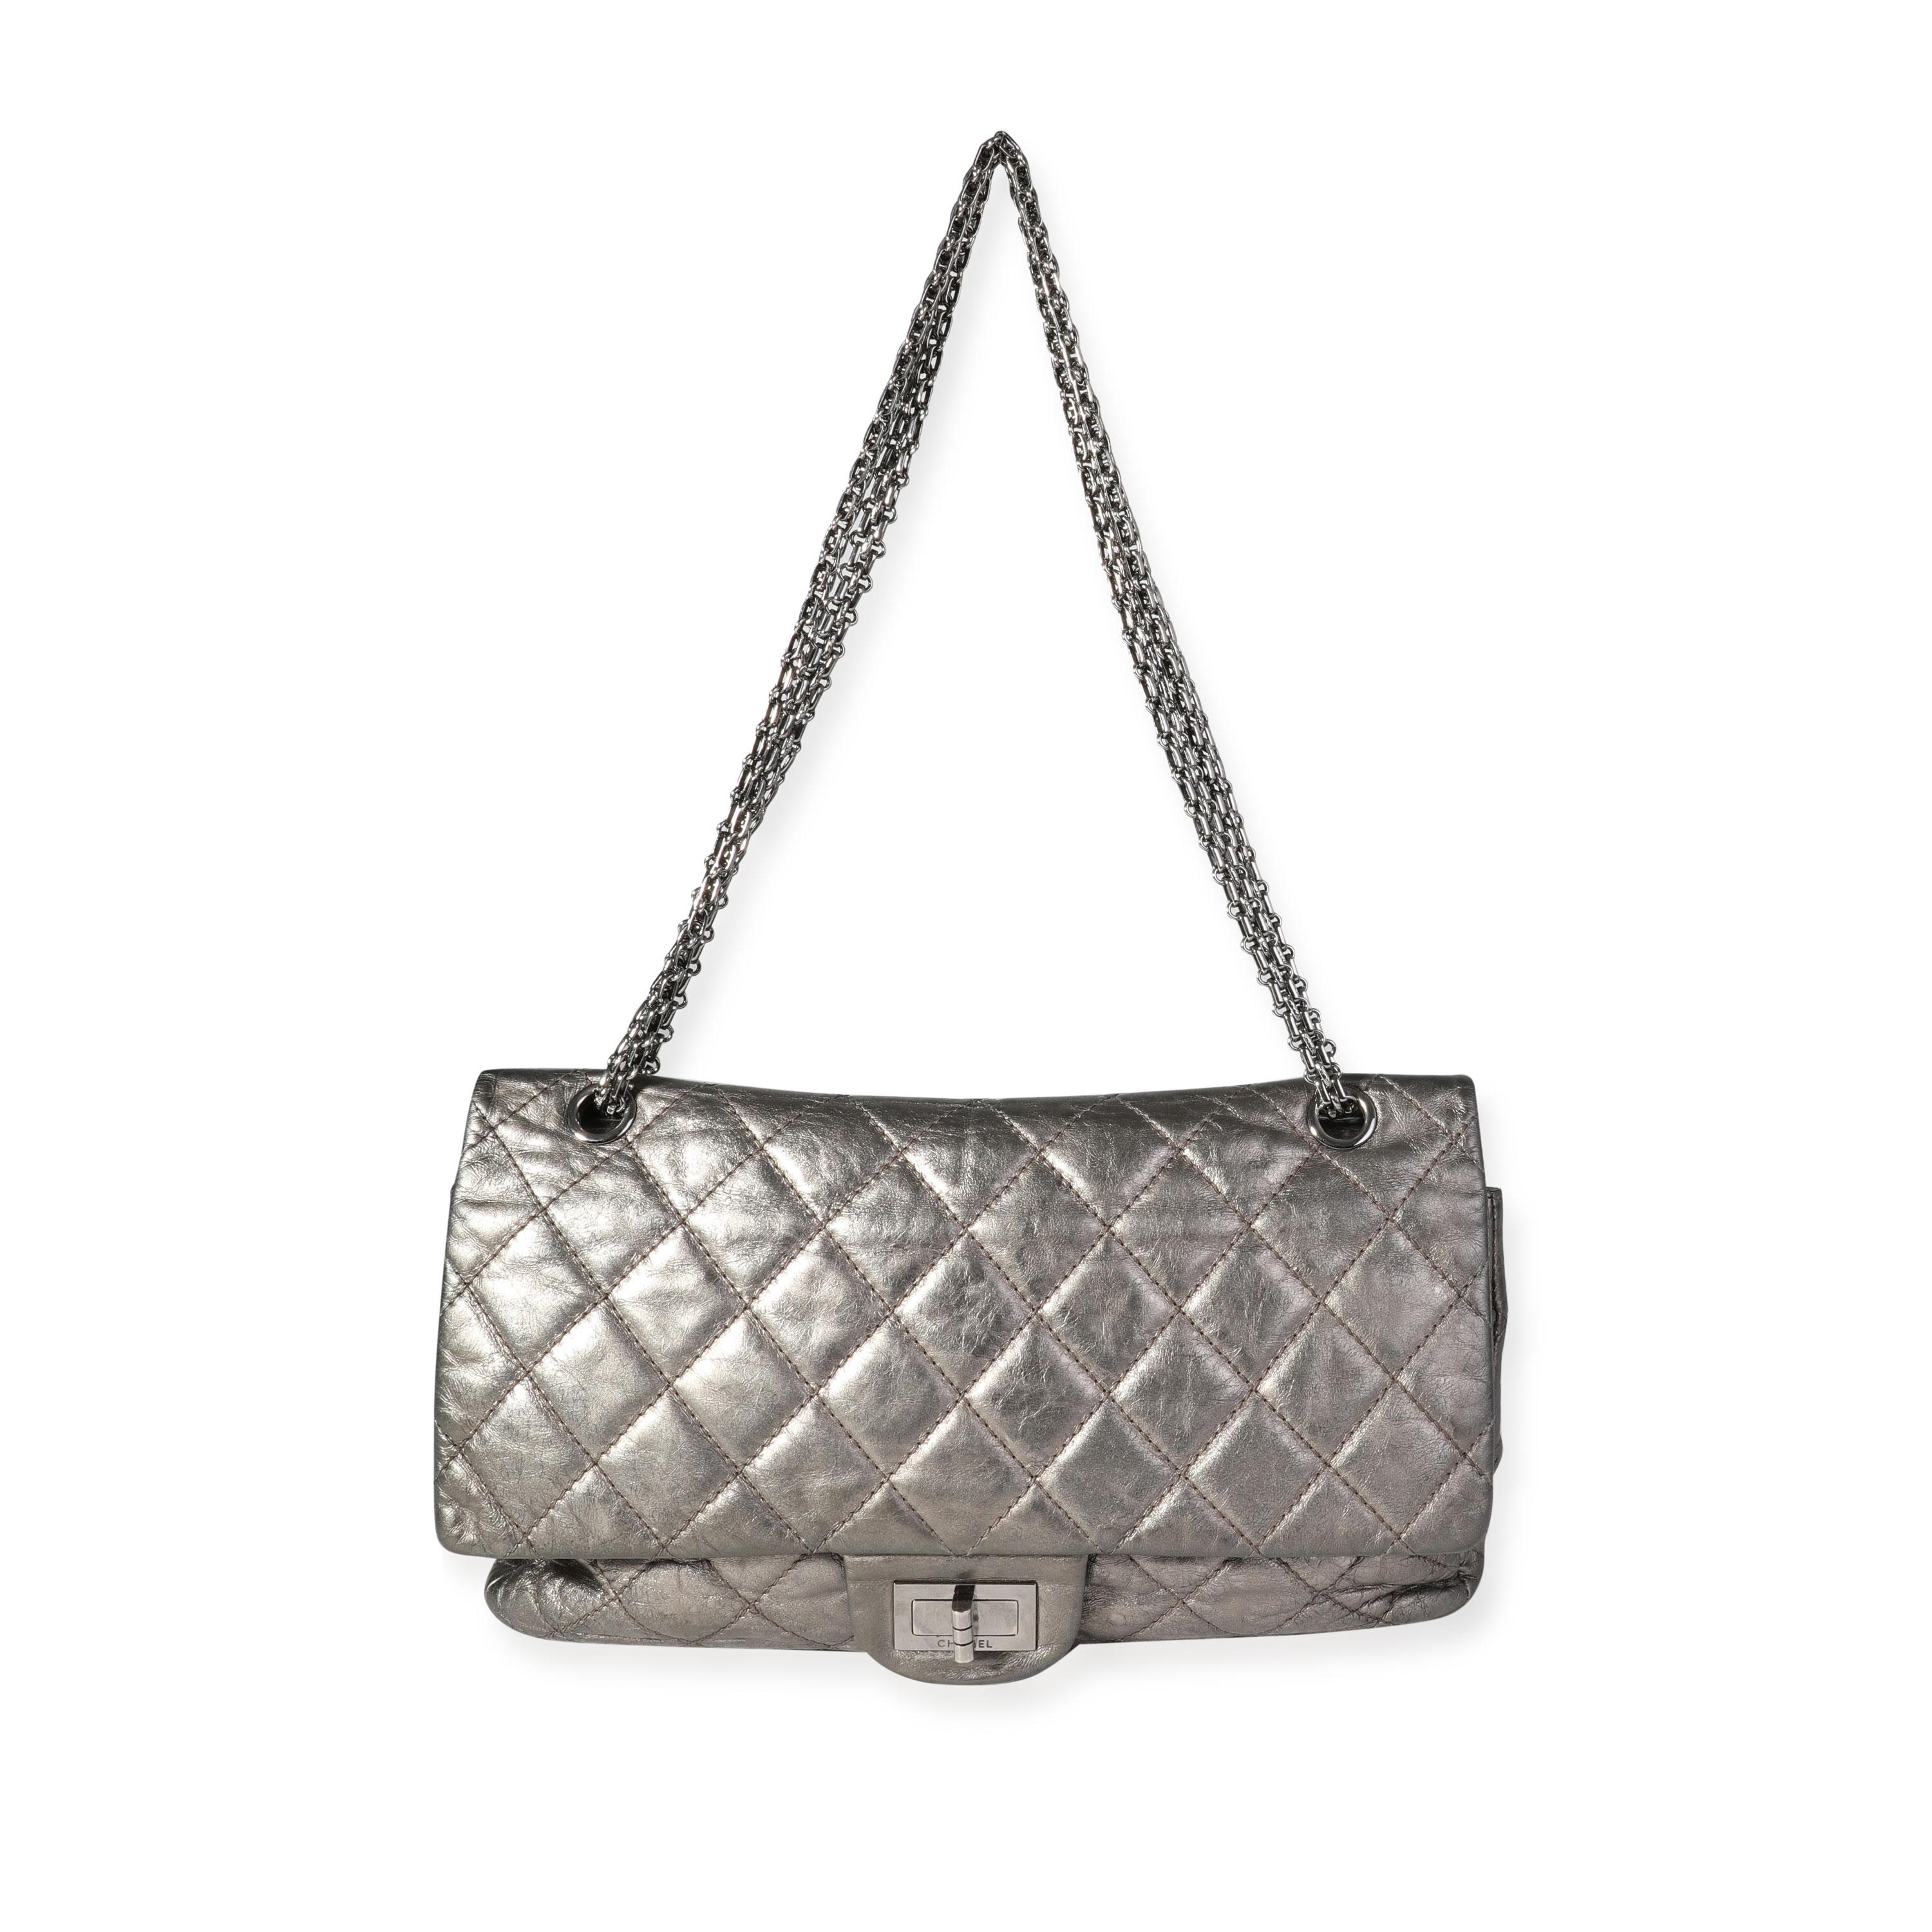 Listing Title: Chanel Metallic Pewter Crinkle Lambskin Reissue 2.25 227 Double Flap Bag
SKU: 118213
MSRP: 10000.00
Condition: Pre-owned (3000)
Handbag Condition: Good
Condition Comments: Good Condition. Crackling to metallic finish. Wear at corners.